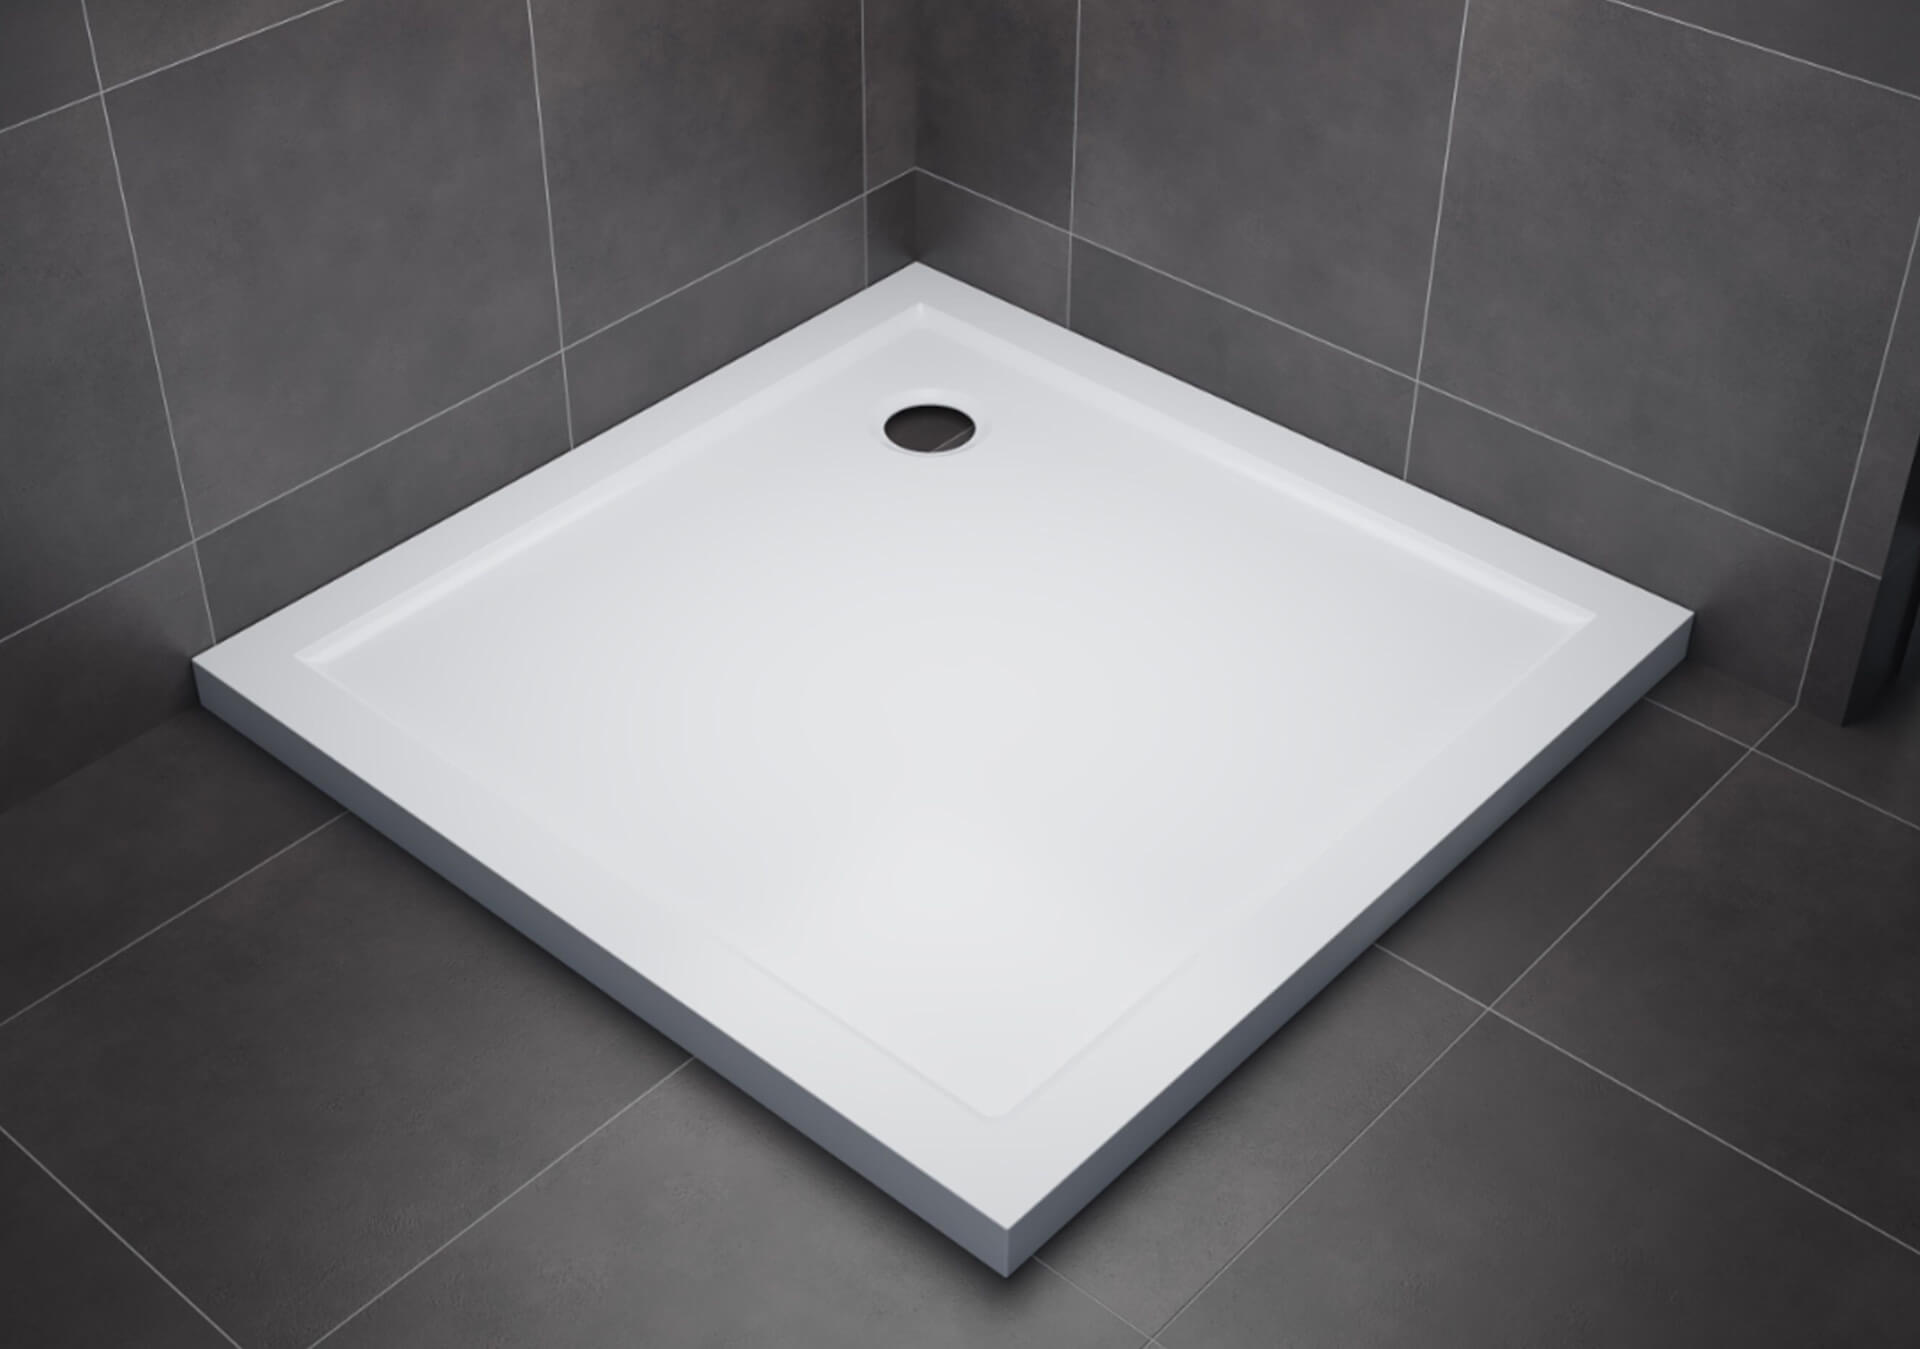 The best material for a shower tray depends on a variety of factors